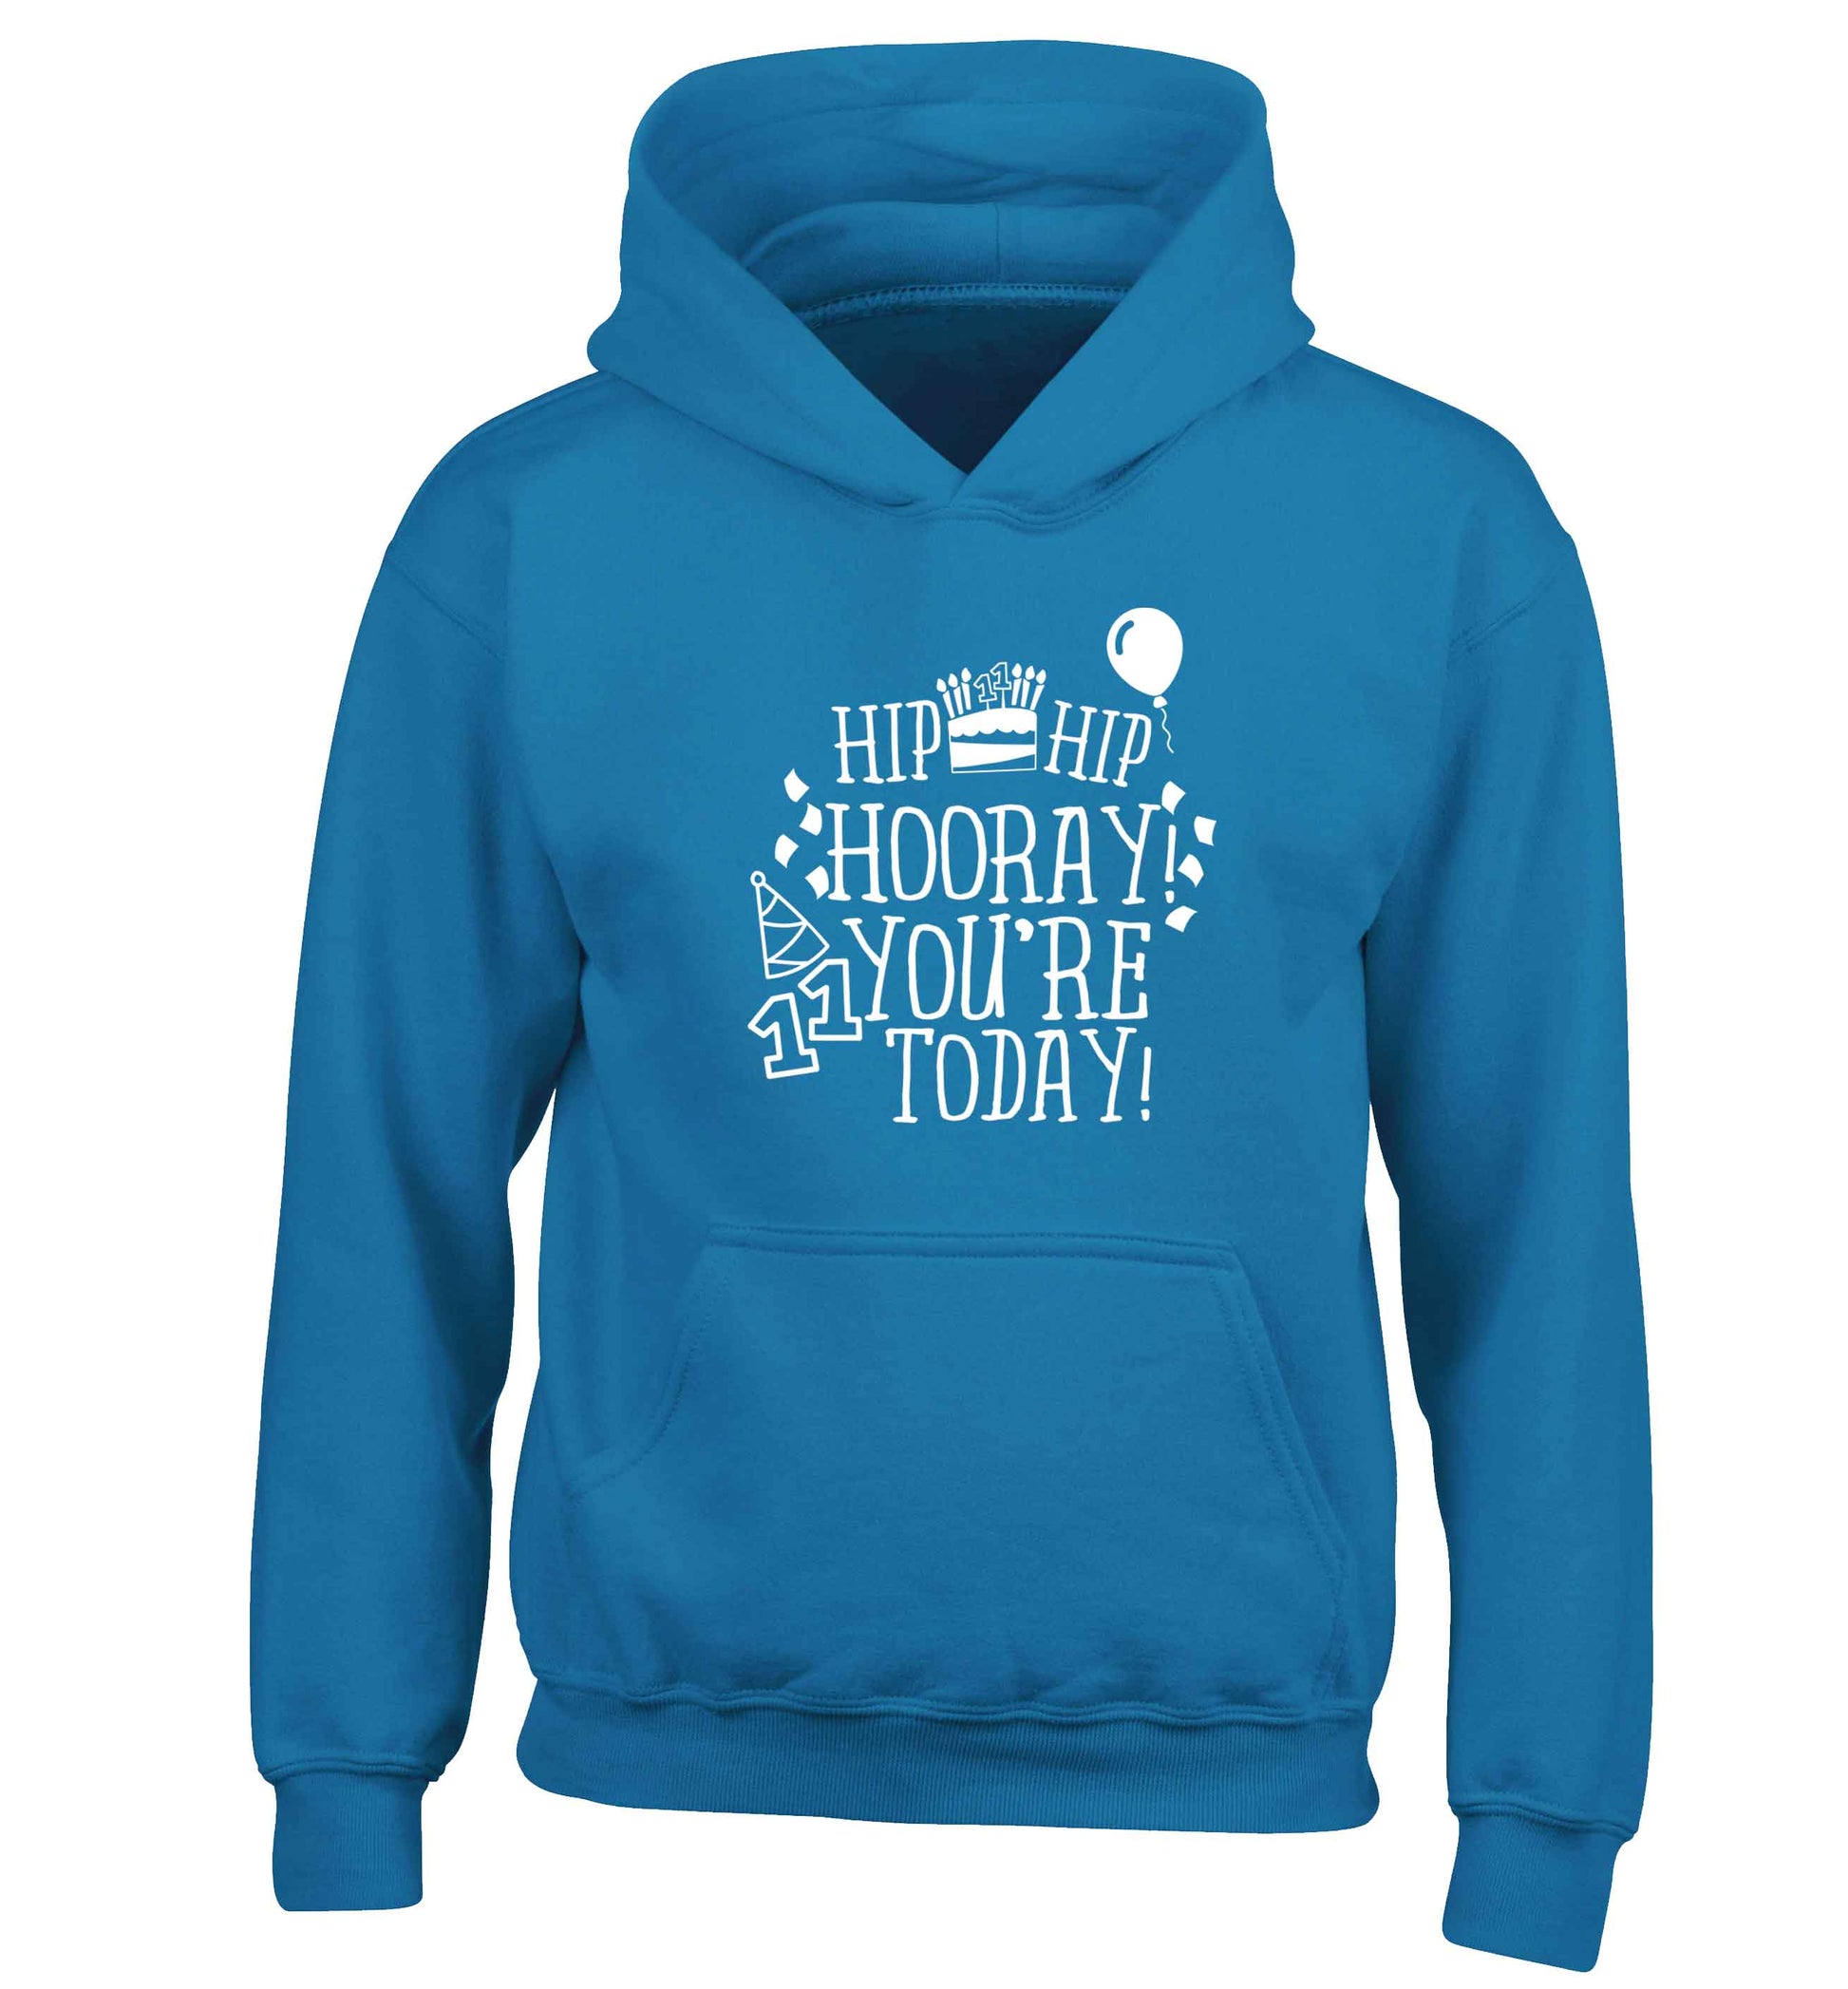 Hip hip hooray I you're eleven today! children's blue hoodie 12-13 Years